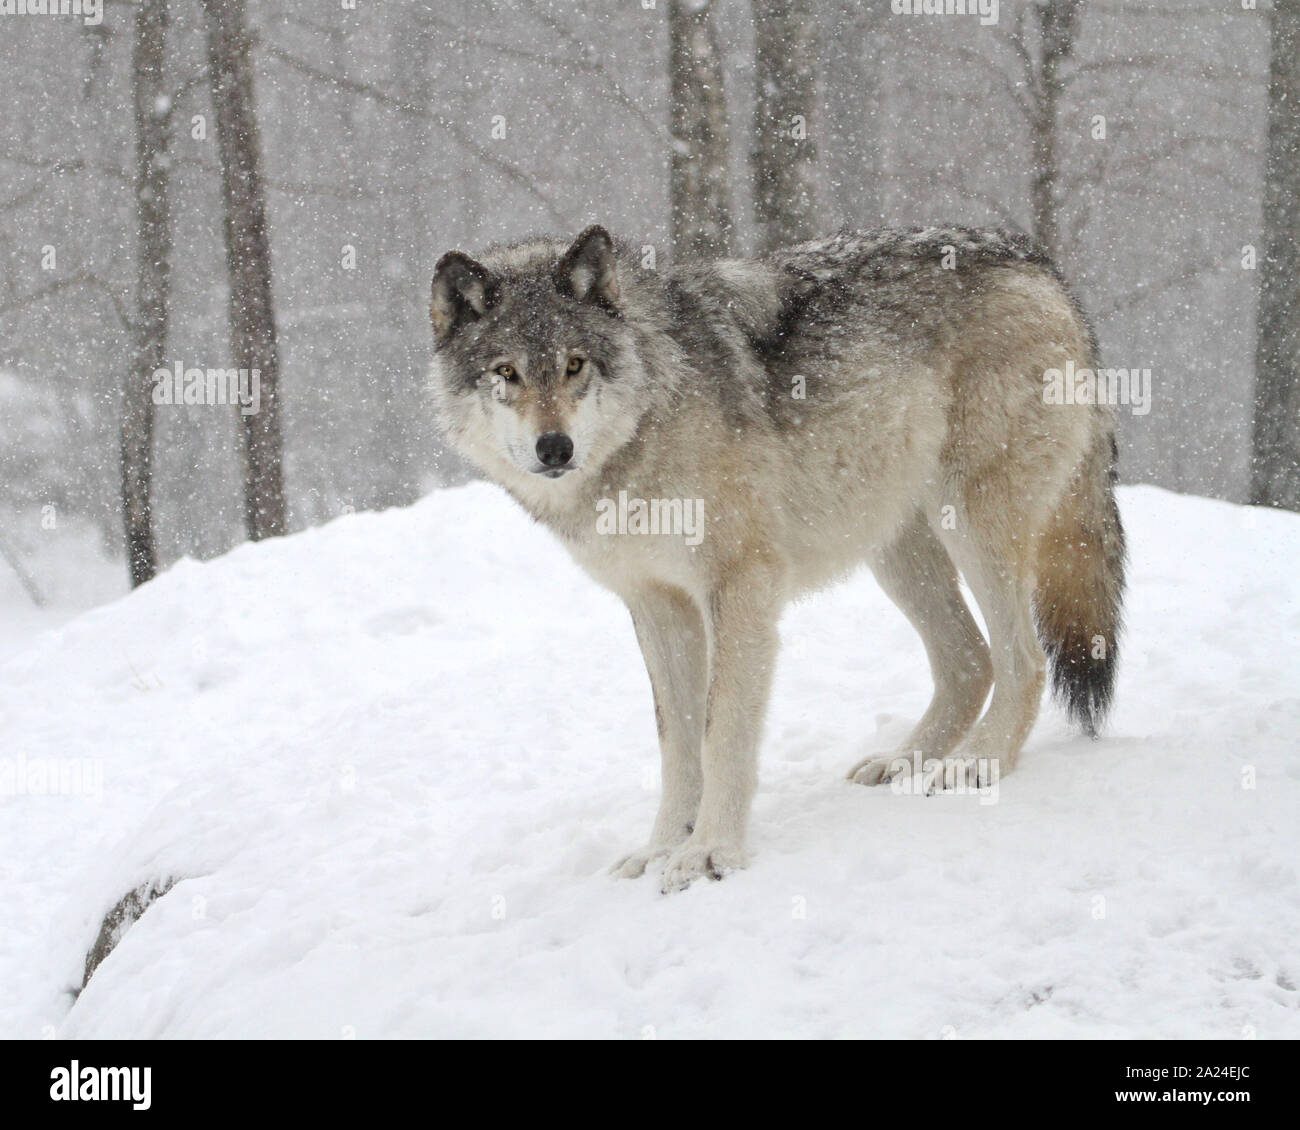 Timber wolves in the winter Stock Photo